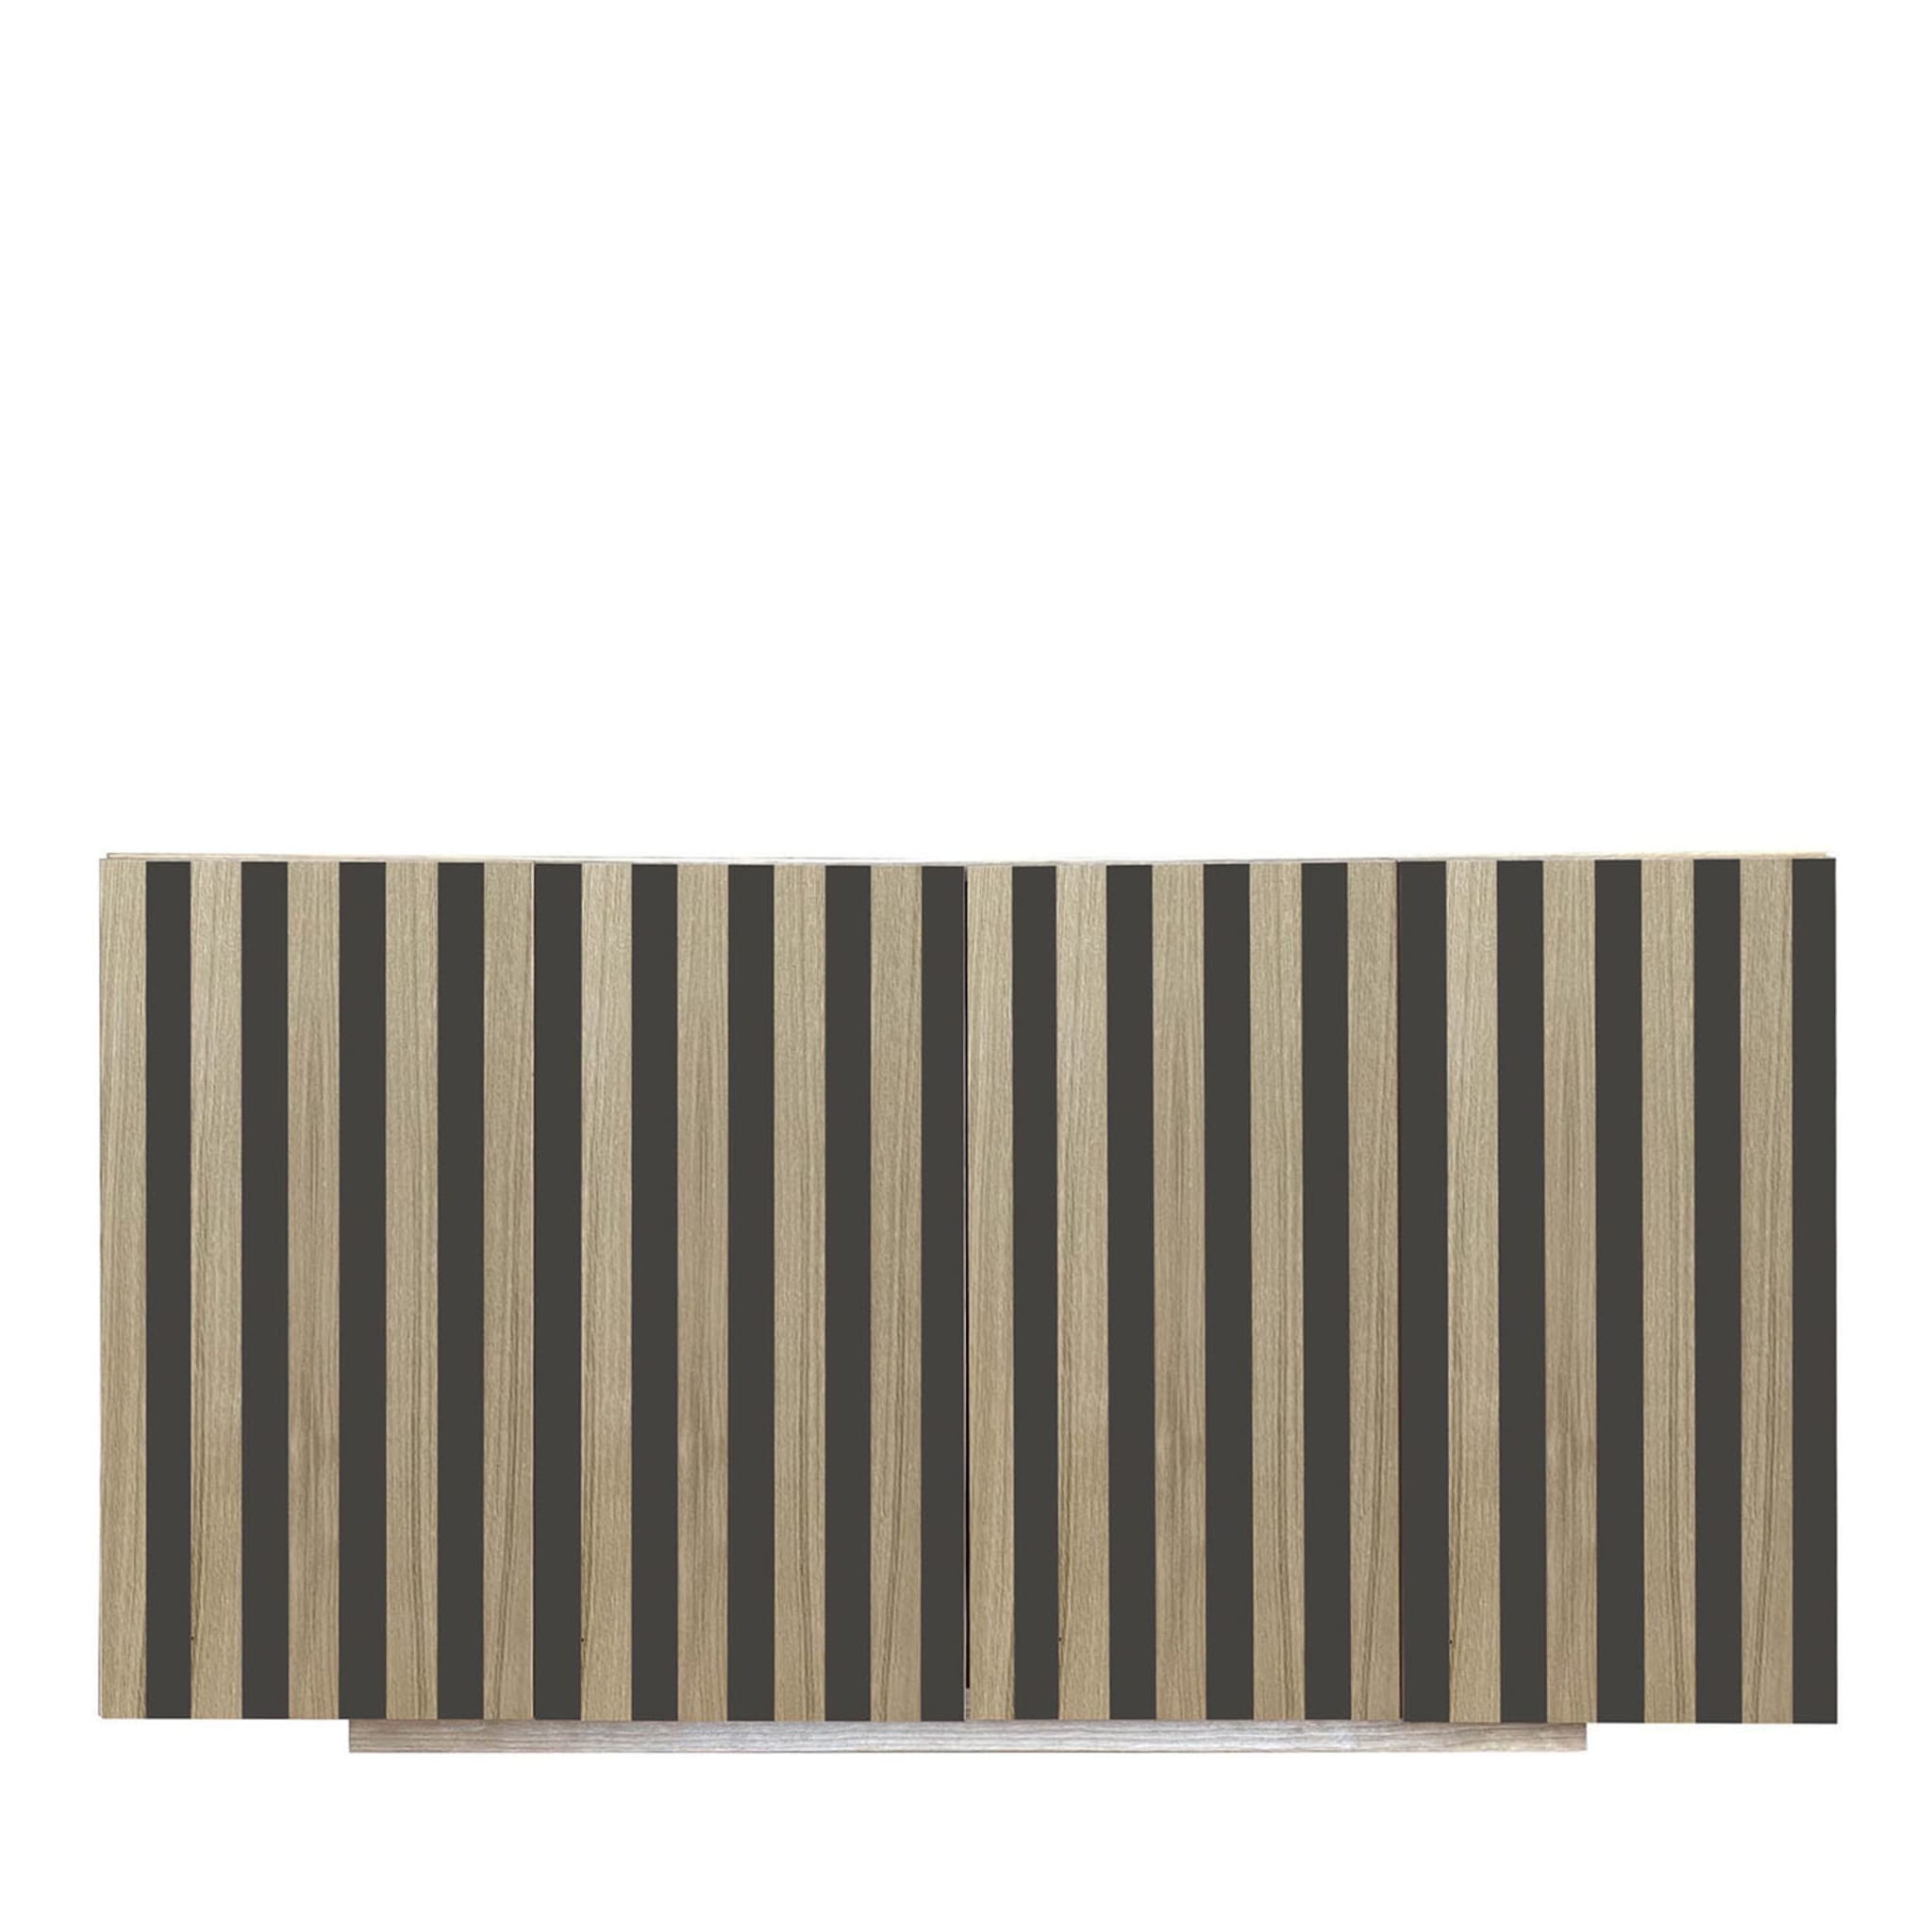 Md1 4-Door Striped Sideboard by Meccani Studio - Main view